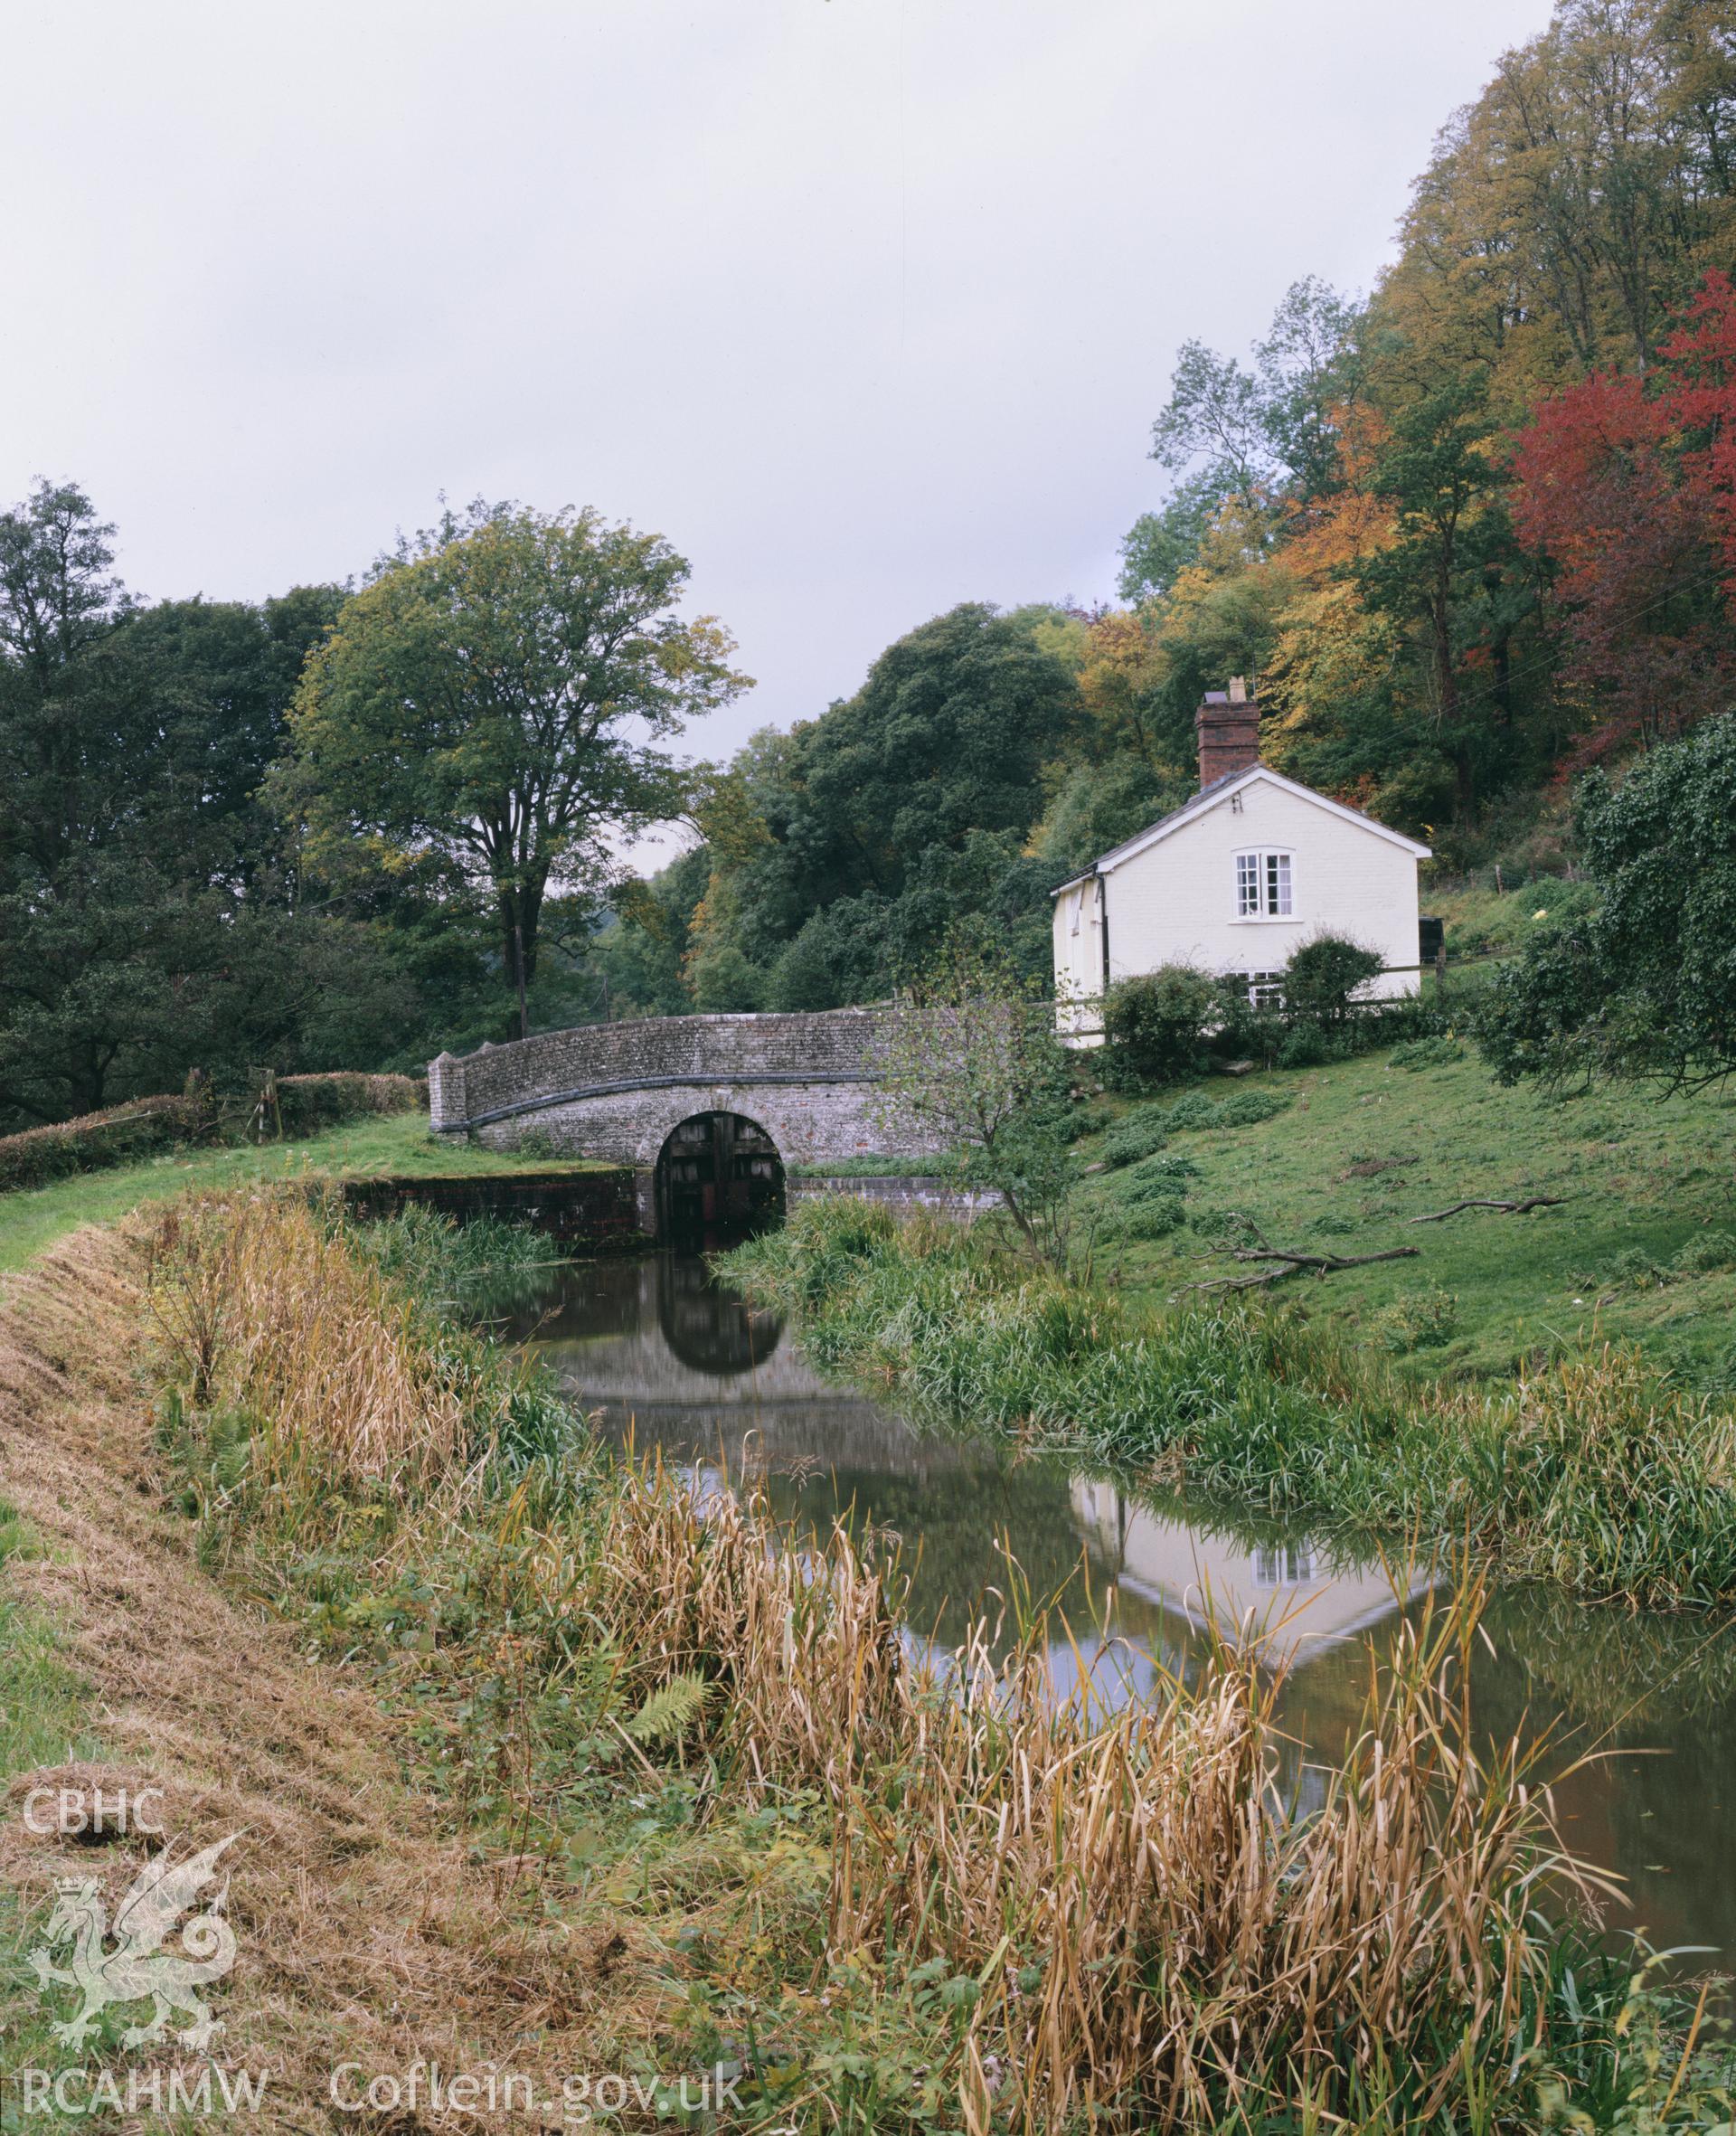 Colour transparency showing a view of the Byles Lock Cottage, near Abermule, produced by RCAHMW, c.1980